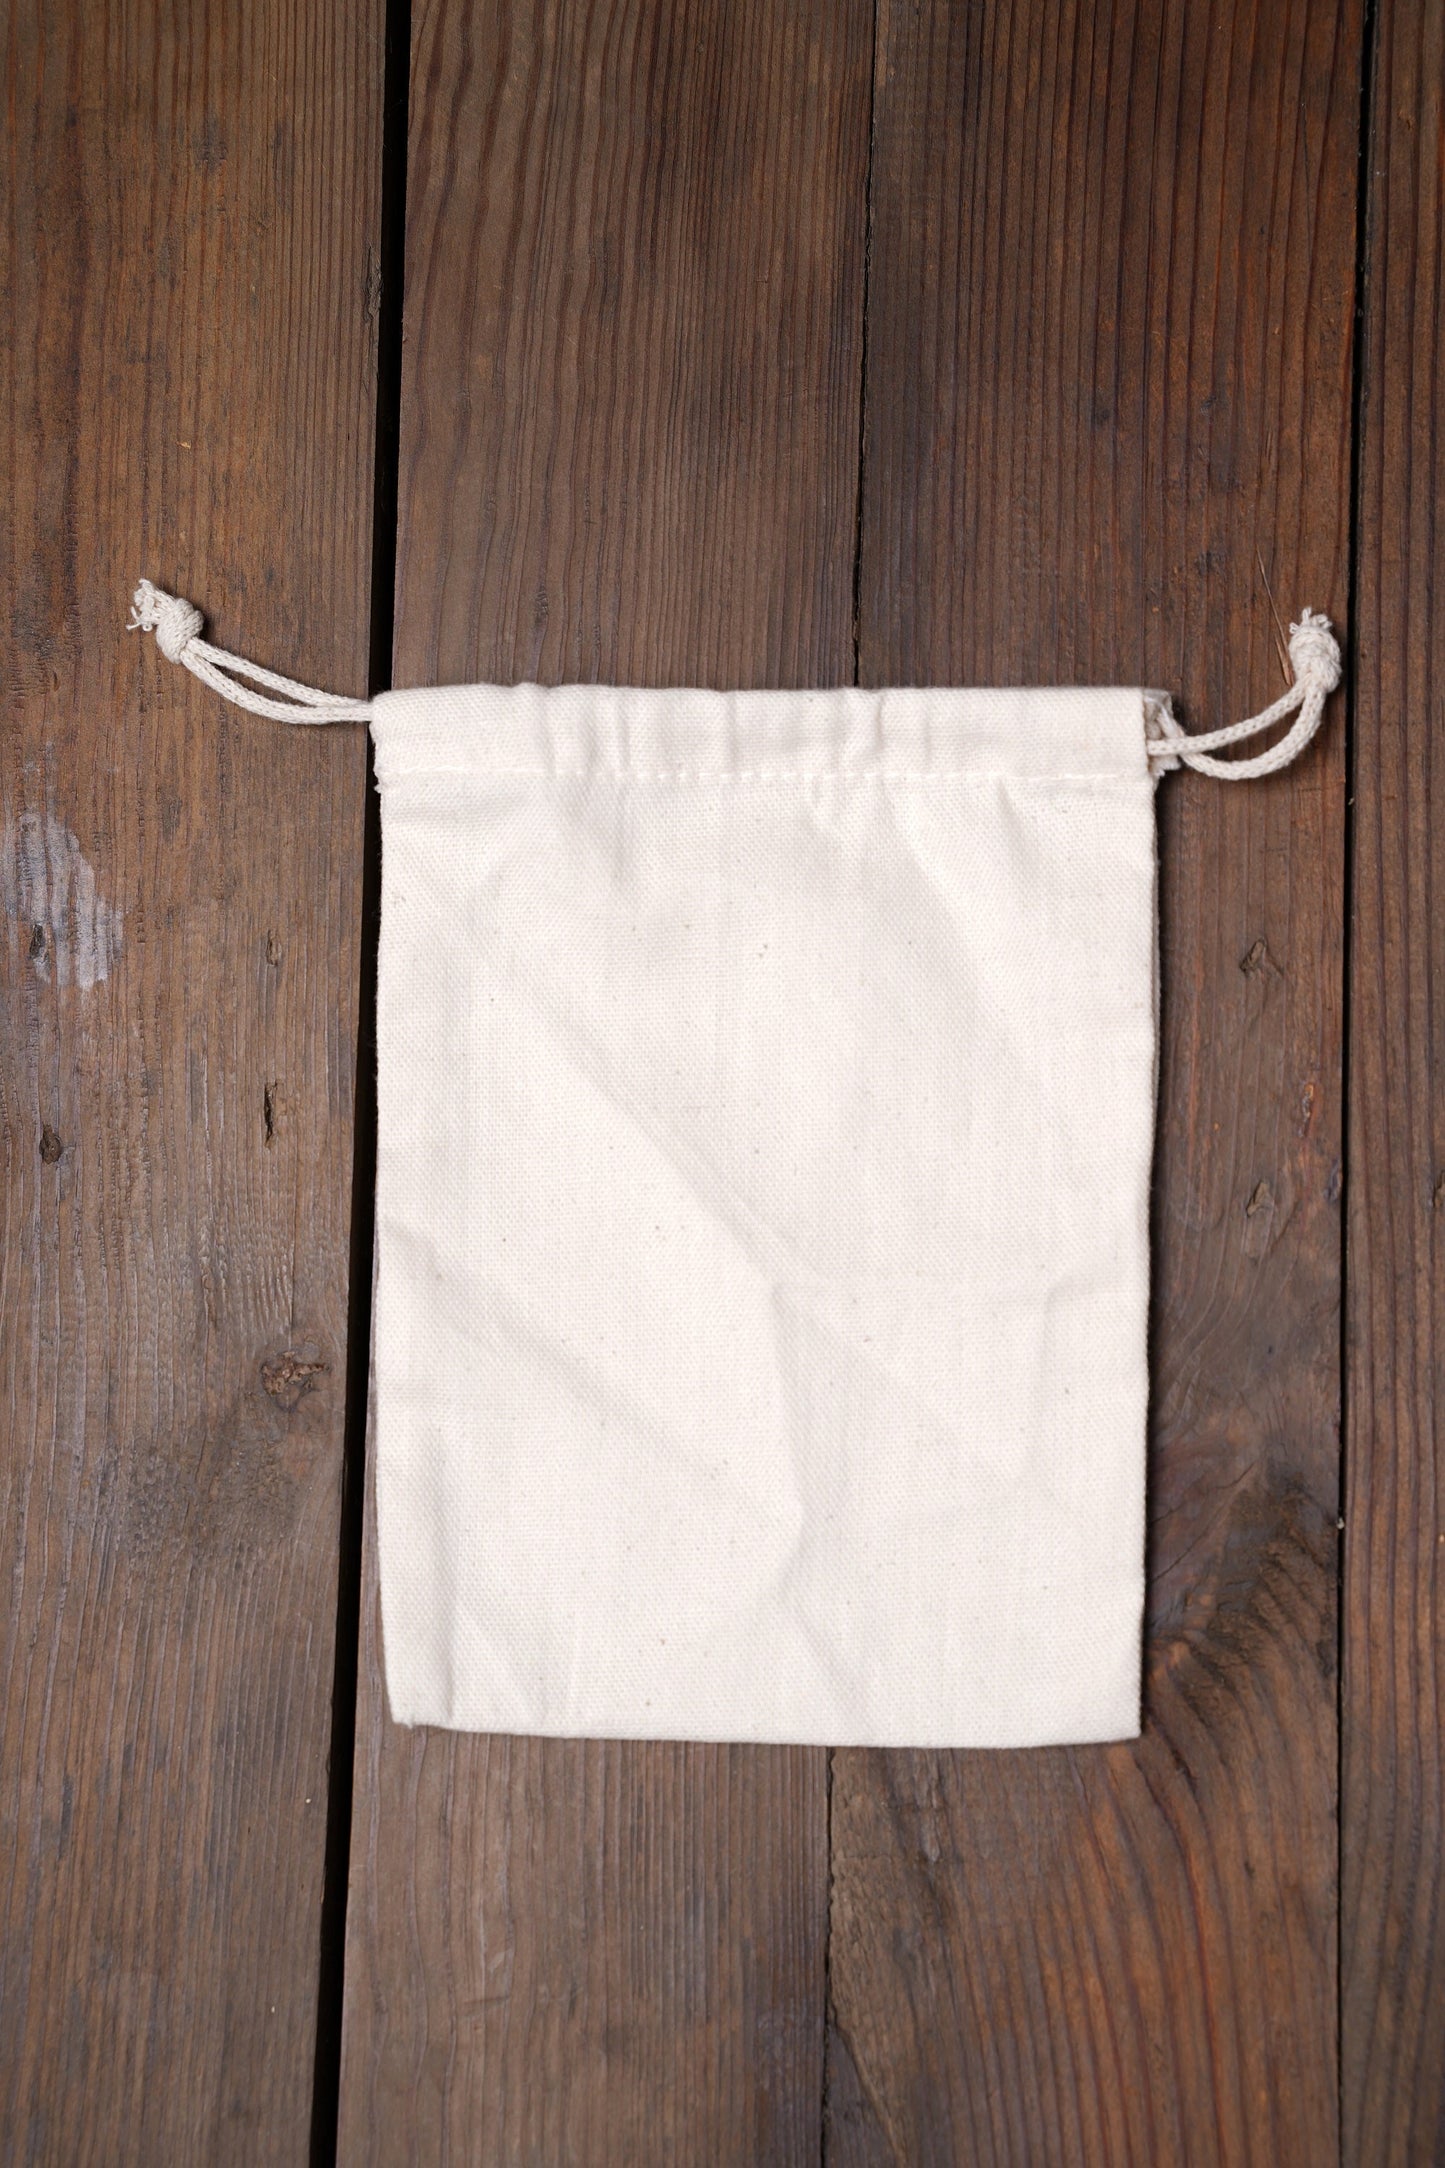 6x8 Inches Reusable Eco-Friendly Double Drawstring Cotton CANVAS Bags Natural Color